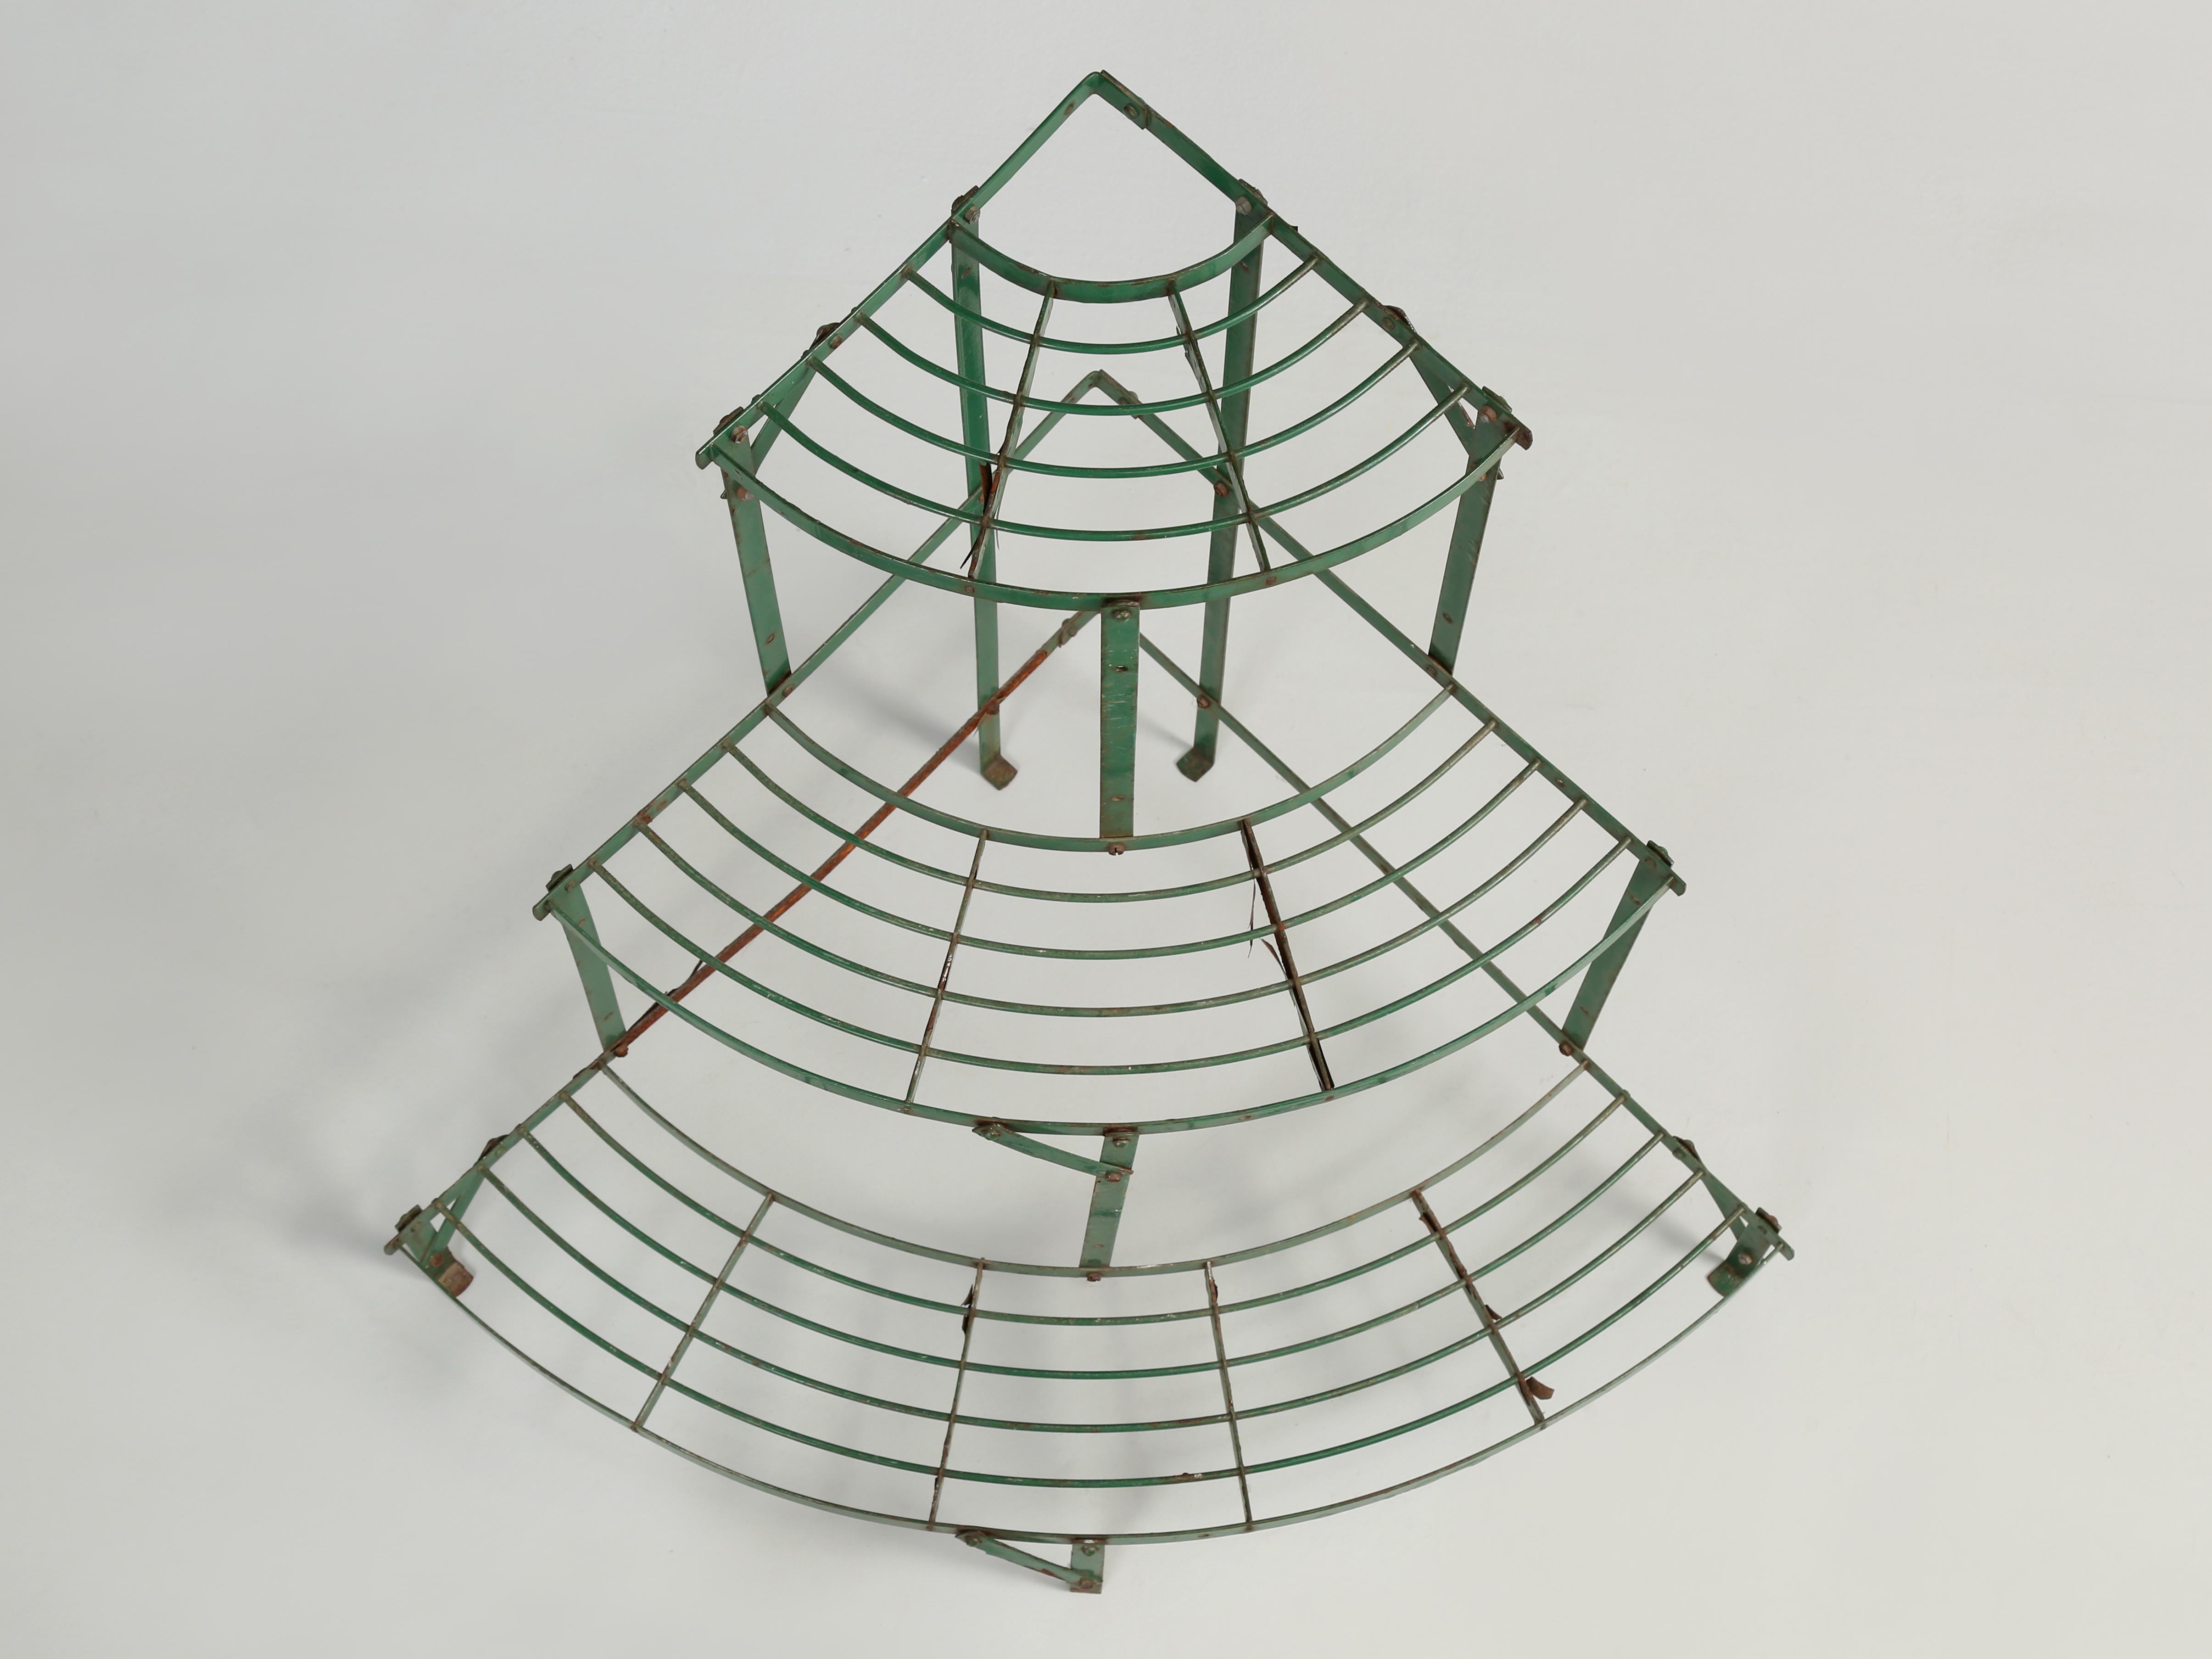 Hand-Crafted English 3-Tier Demilune Plant Stand in Old Green Paint from Staffordshire, UK